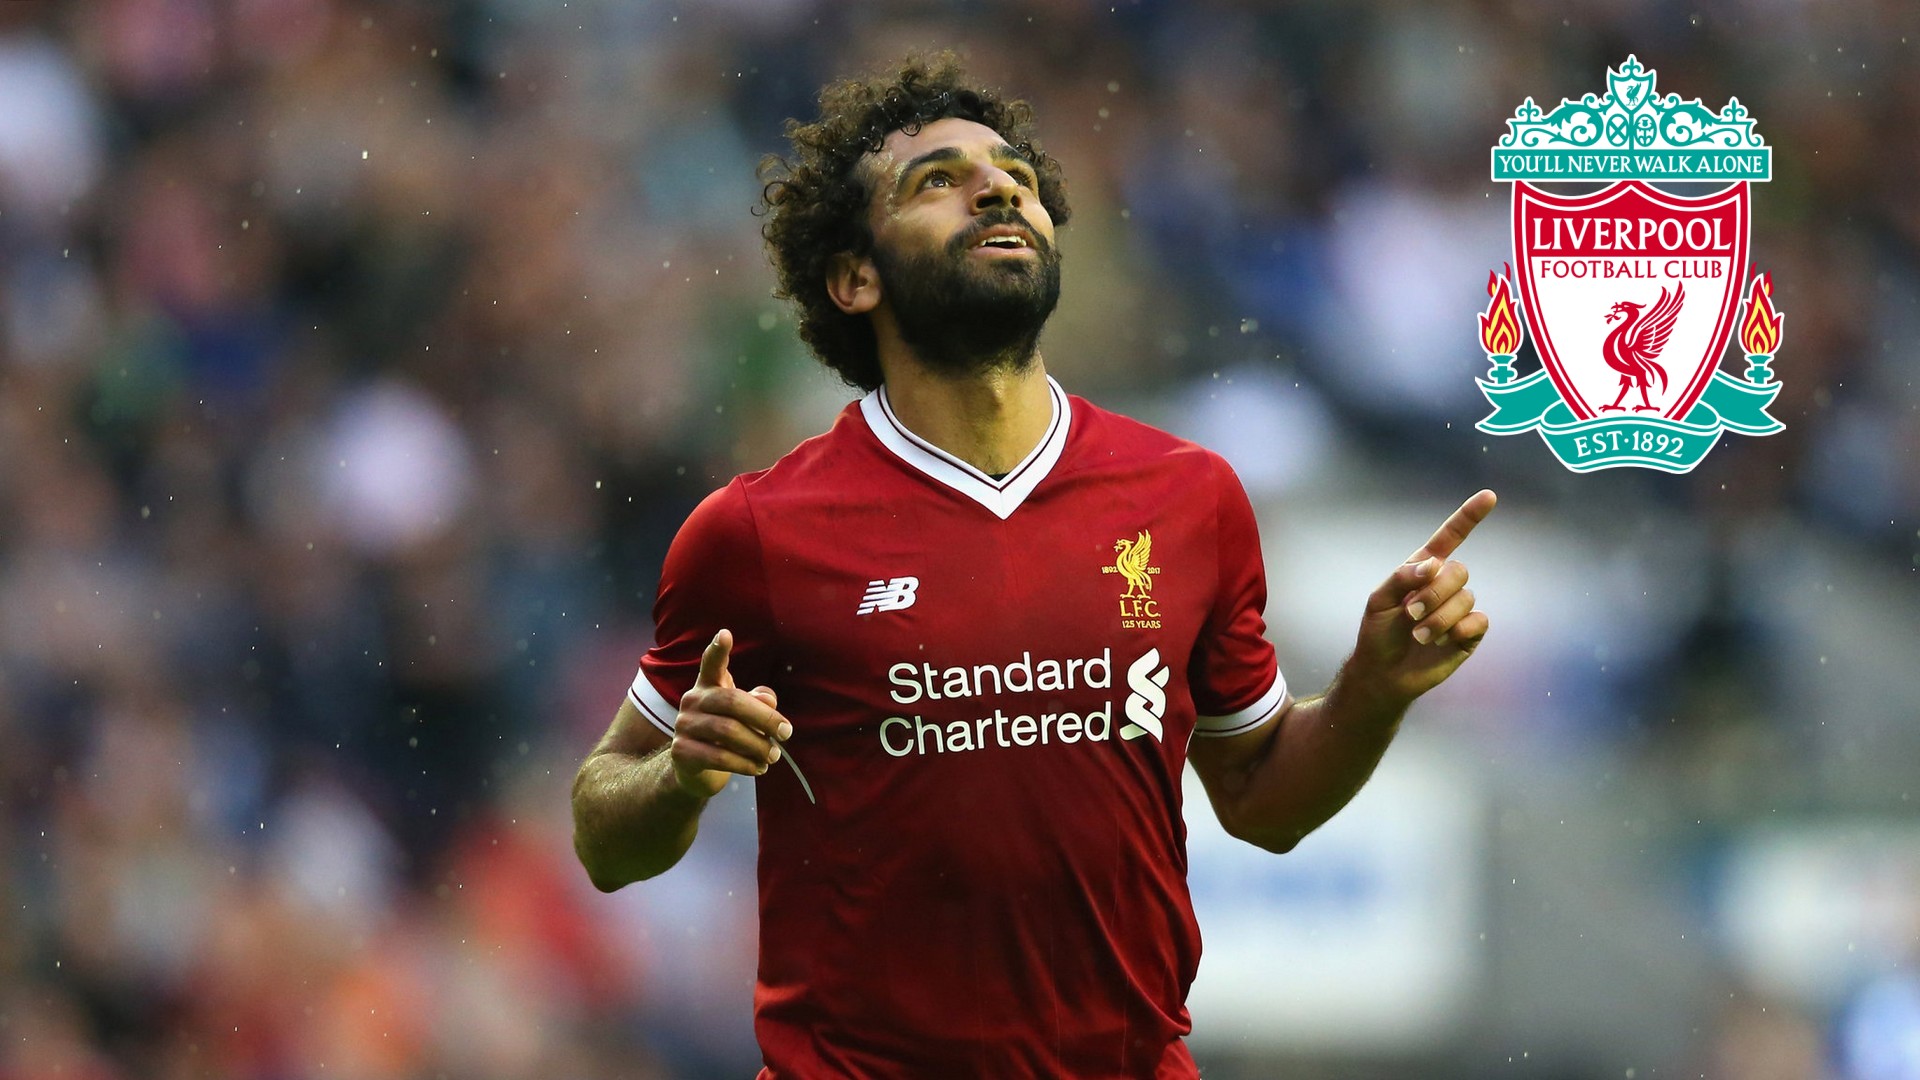 Liverpool Mohamed Salah HD Backgrounds with image resolution 1920x1080 pixel. You can make this wallpaper for your Desktop Computer Backgrounds, Mac Wallpapers, Android Lock screen or iPhone Screensavers